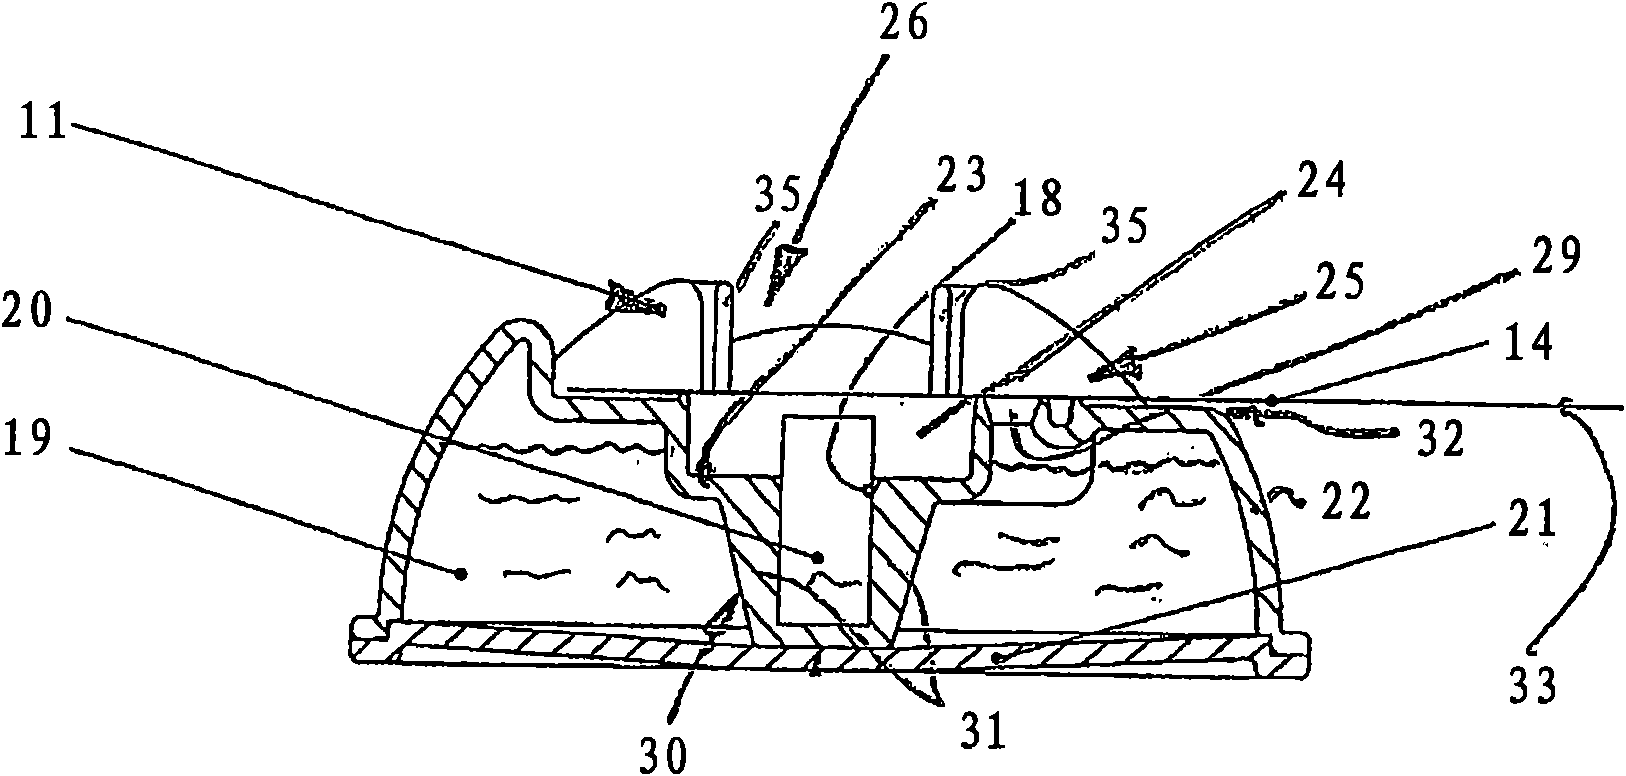 Apparatus for refilling an ink cartridge for an inkjet printer